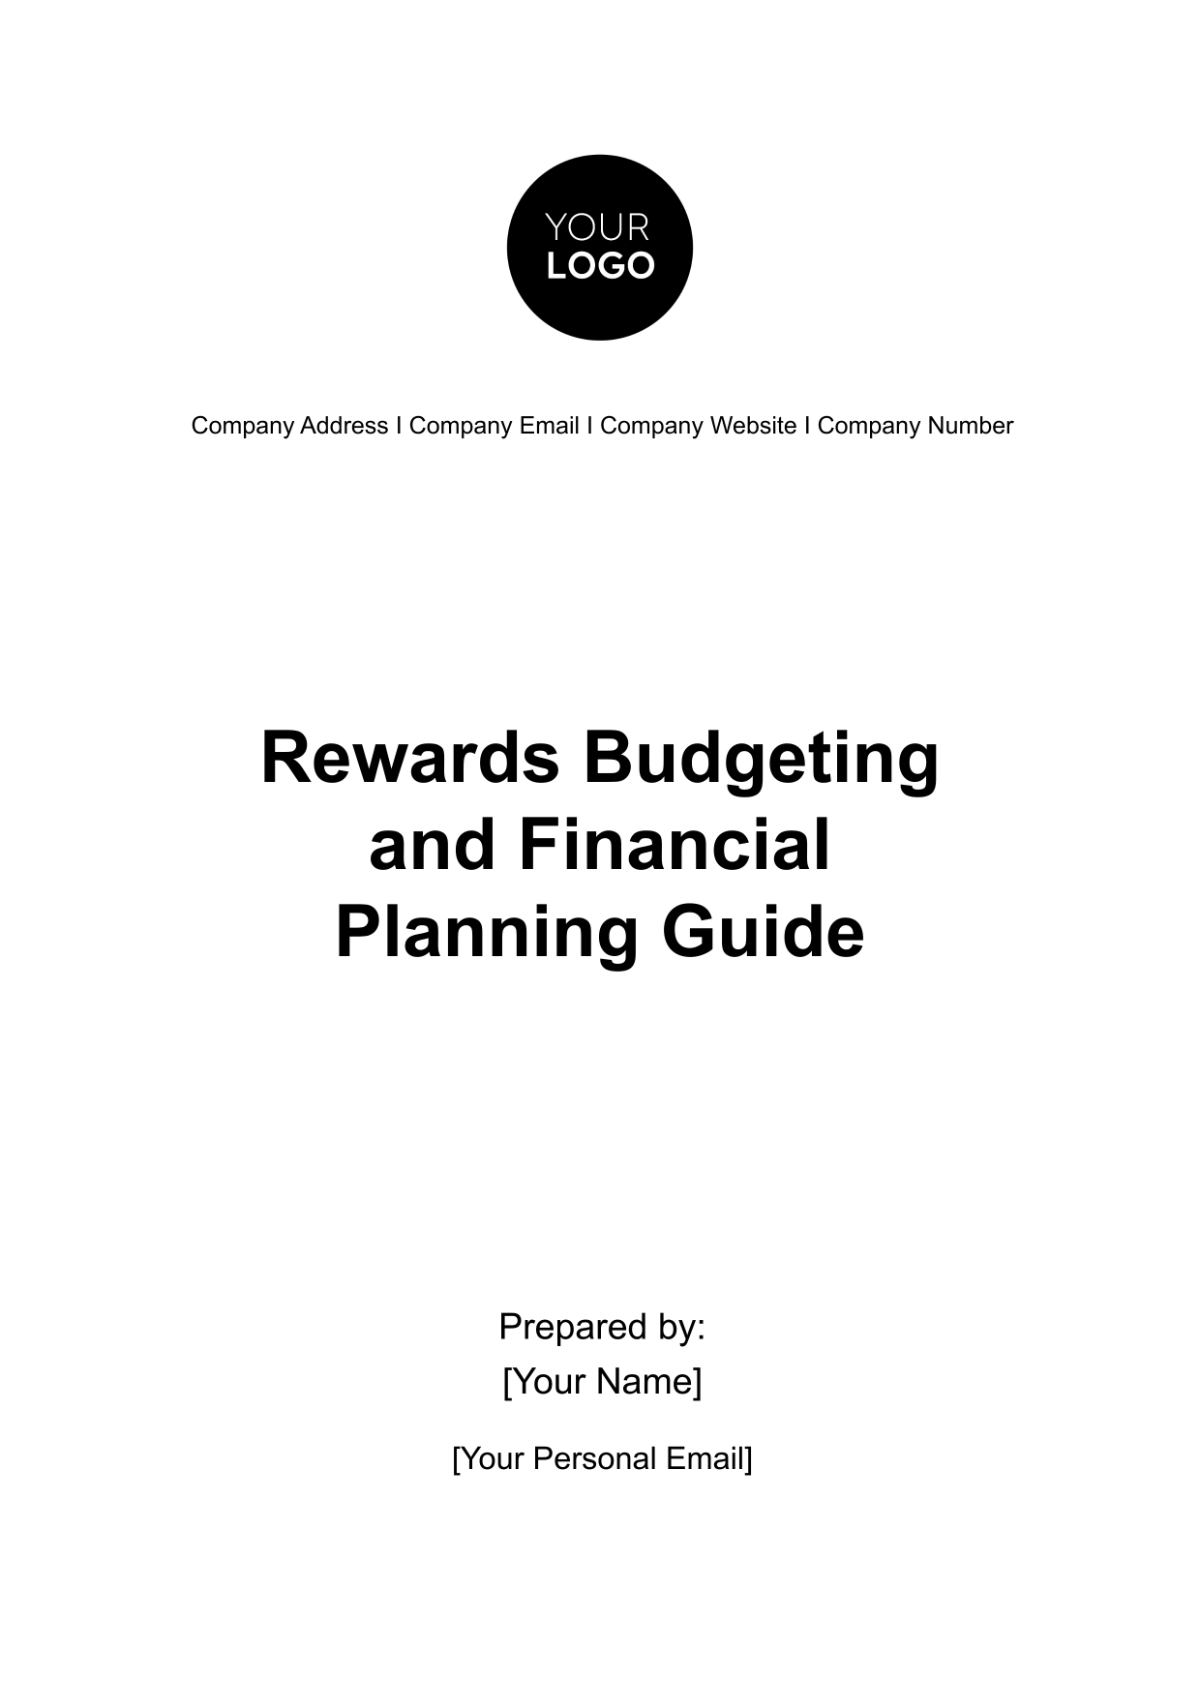 Free Rewards Budgeting and Financial Planning Guide HR Template